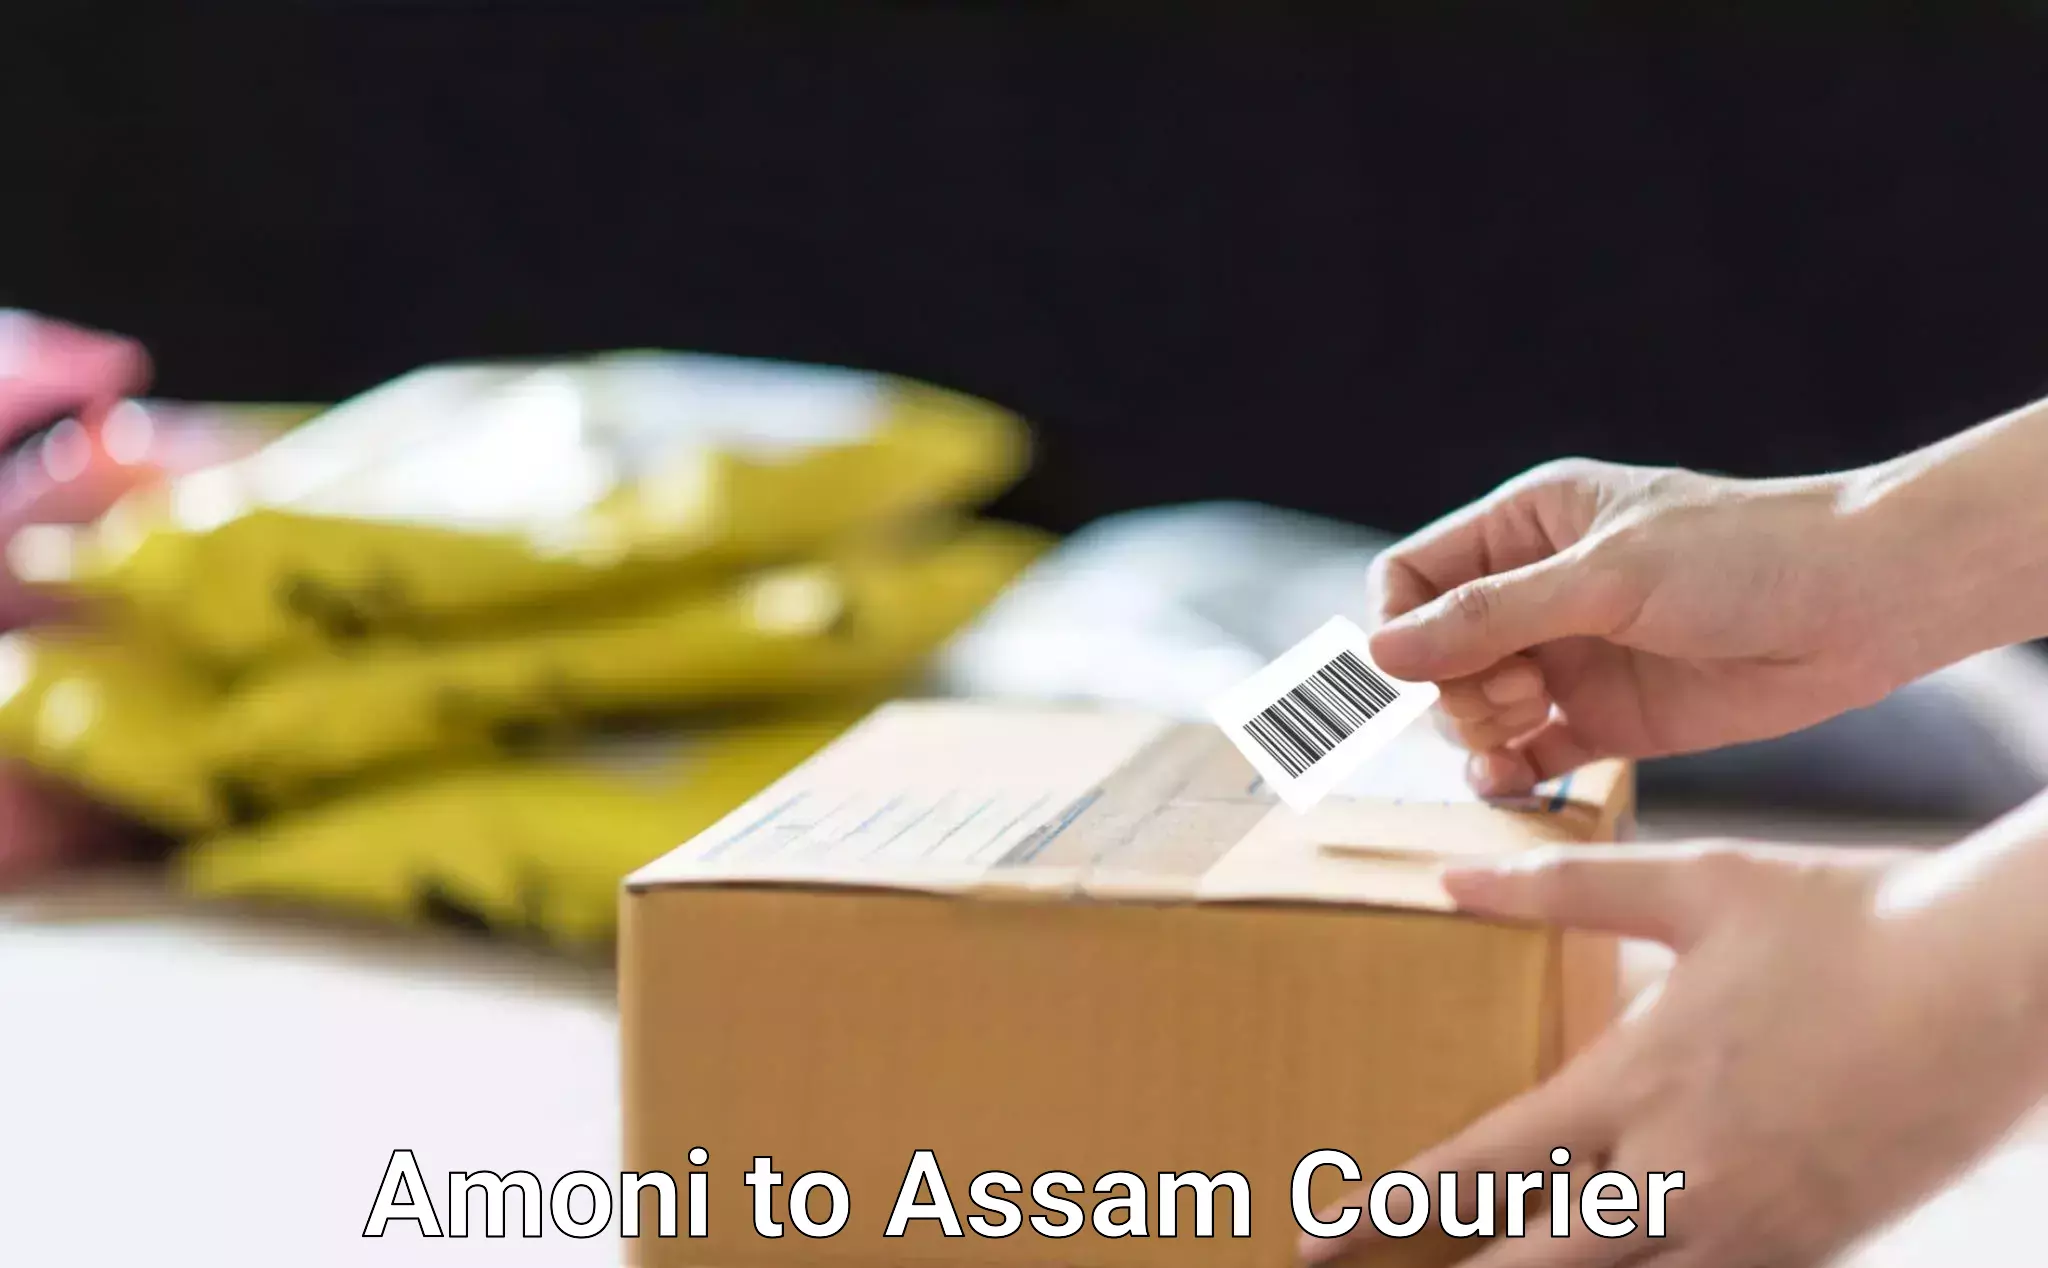 Sustainable delivery practices Amoni to Jorhat